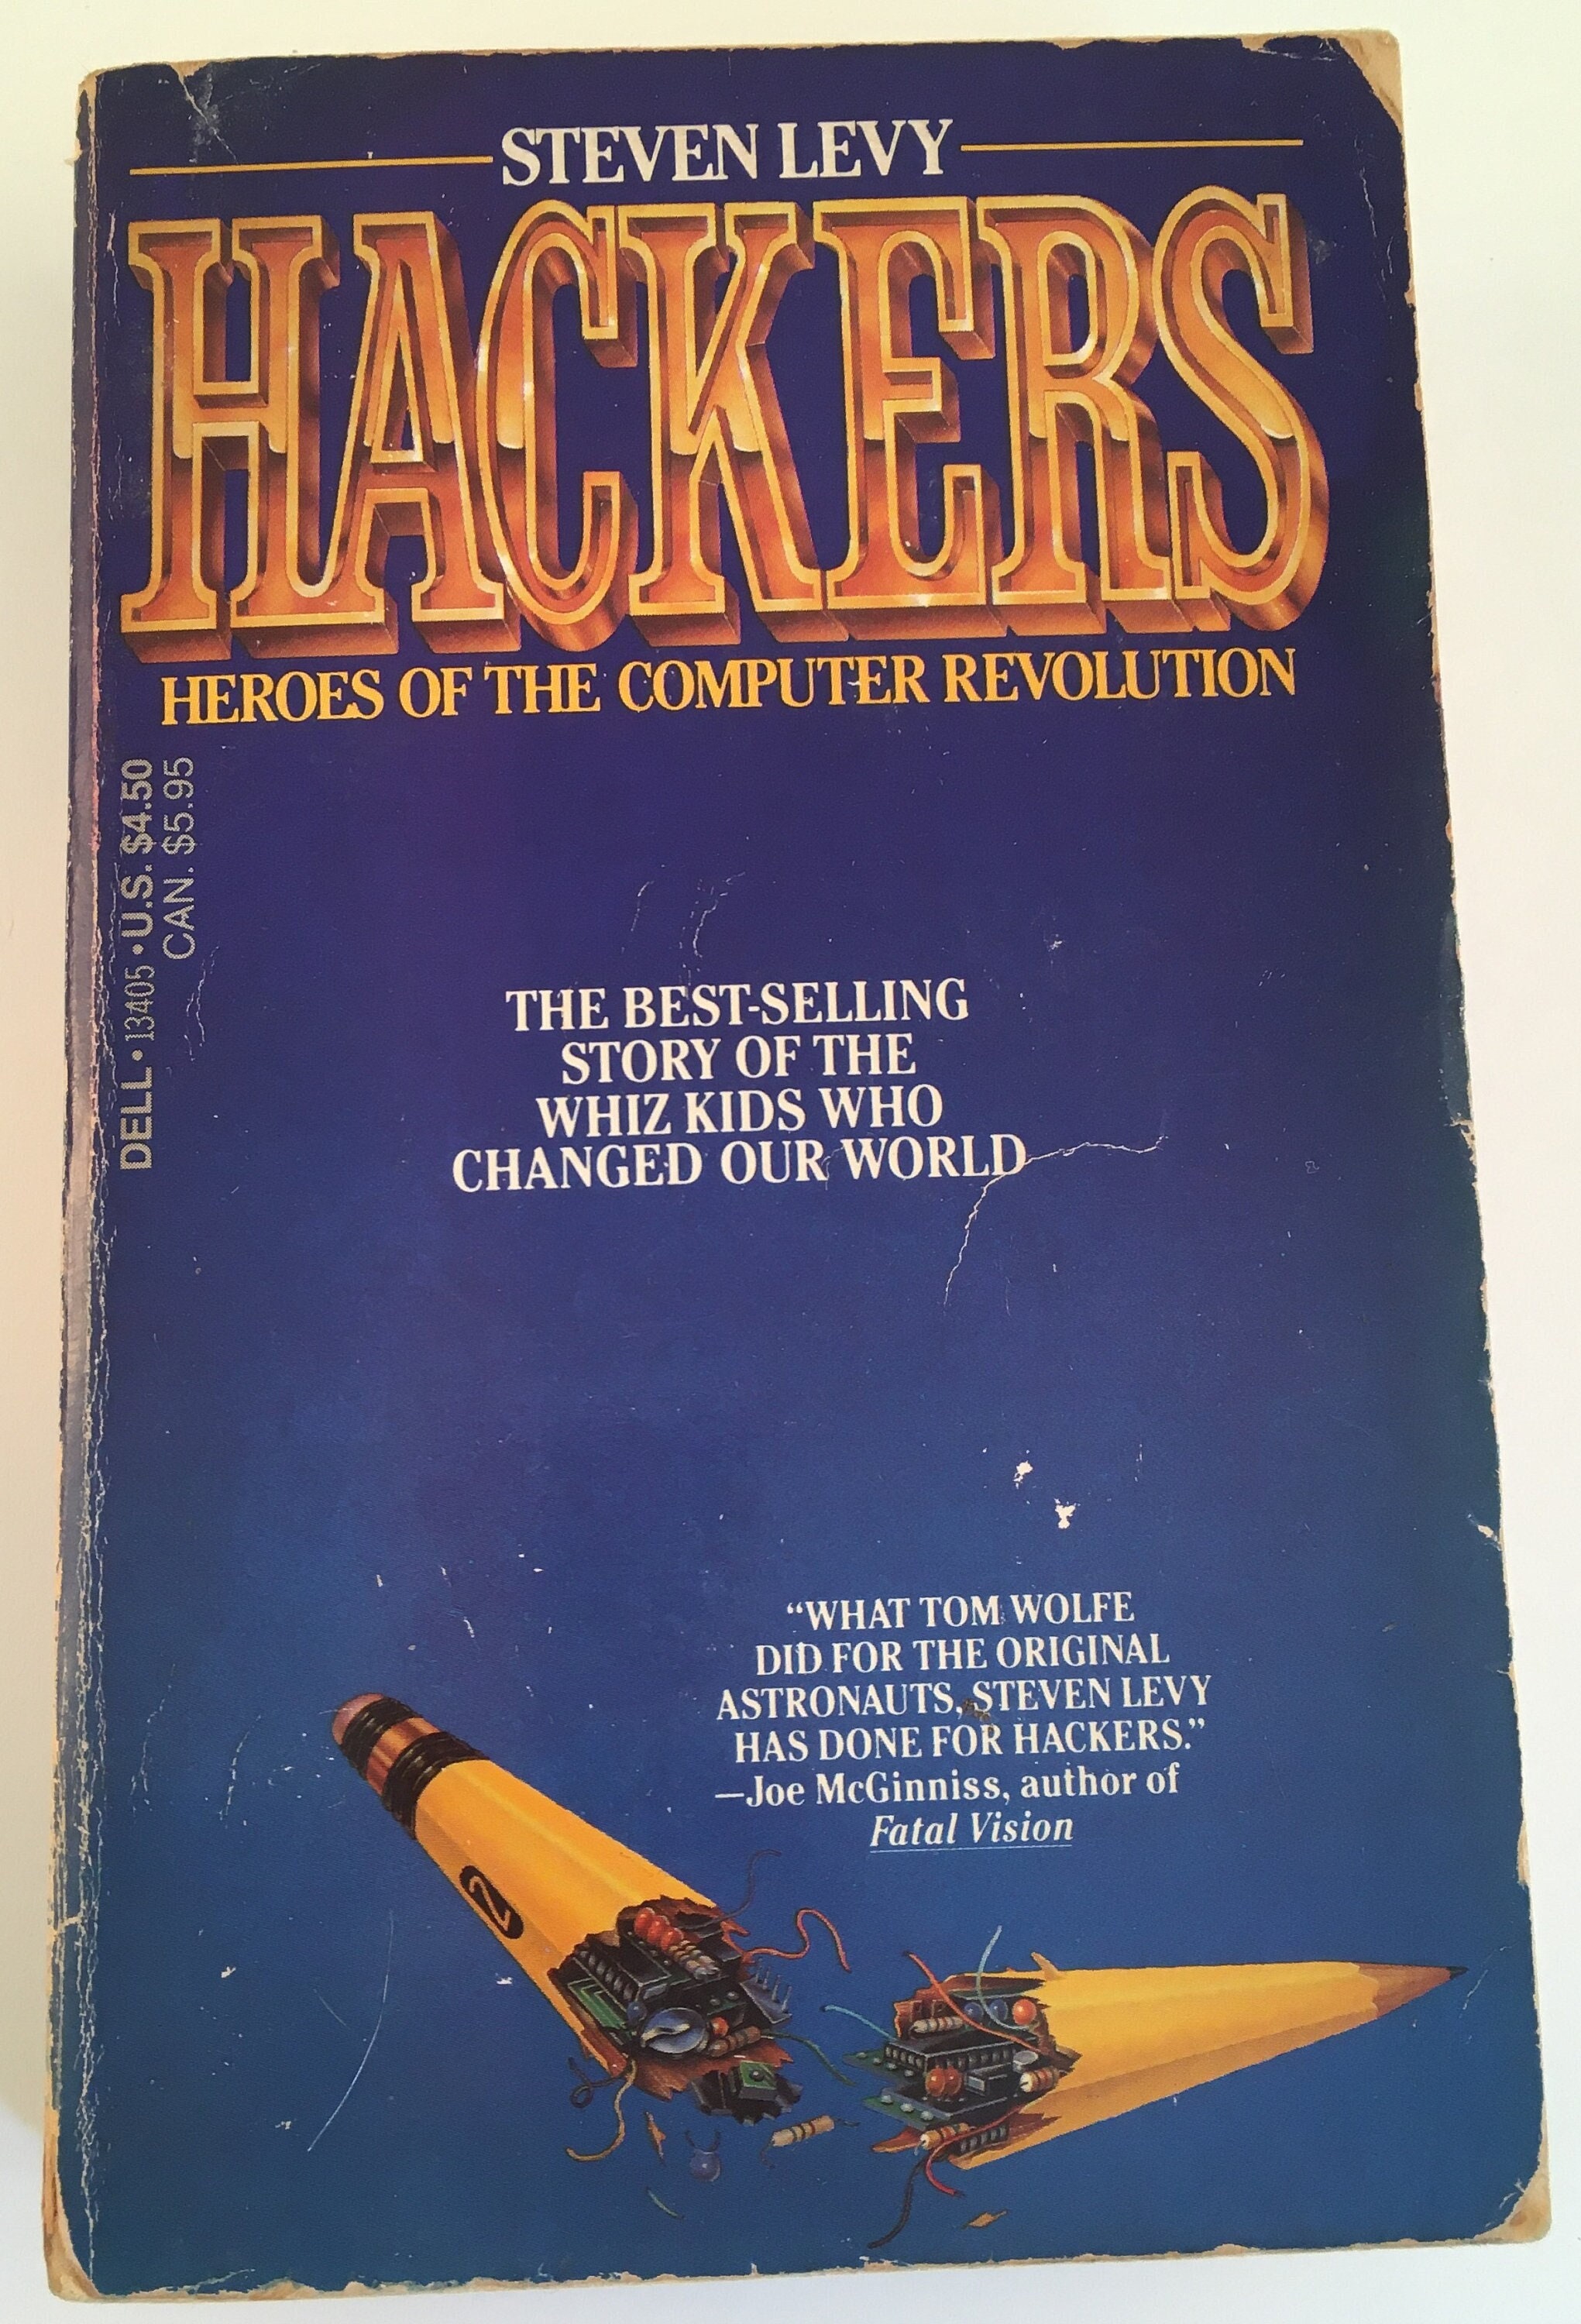 Hackers Heroes of the Computer Revolution by Steven Levy PB - Etsy